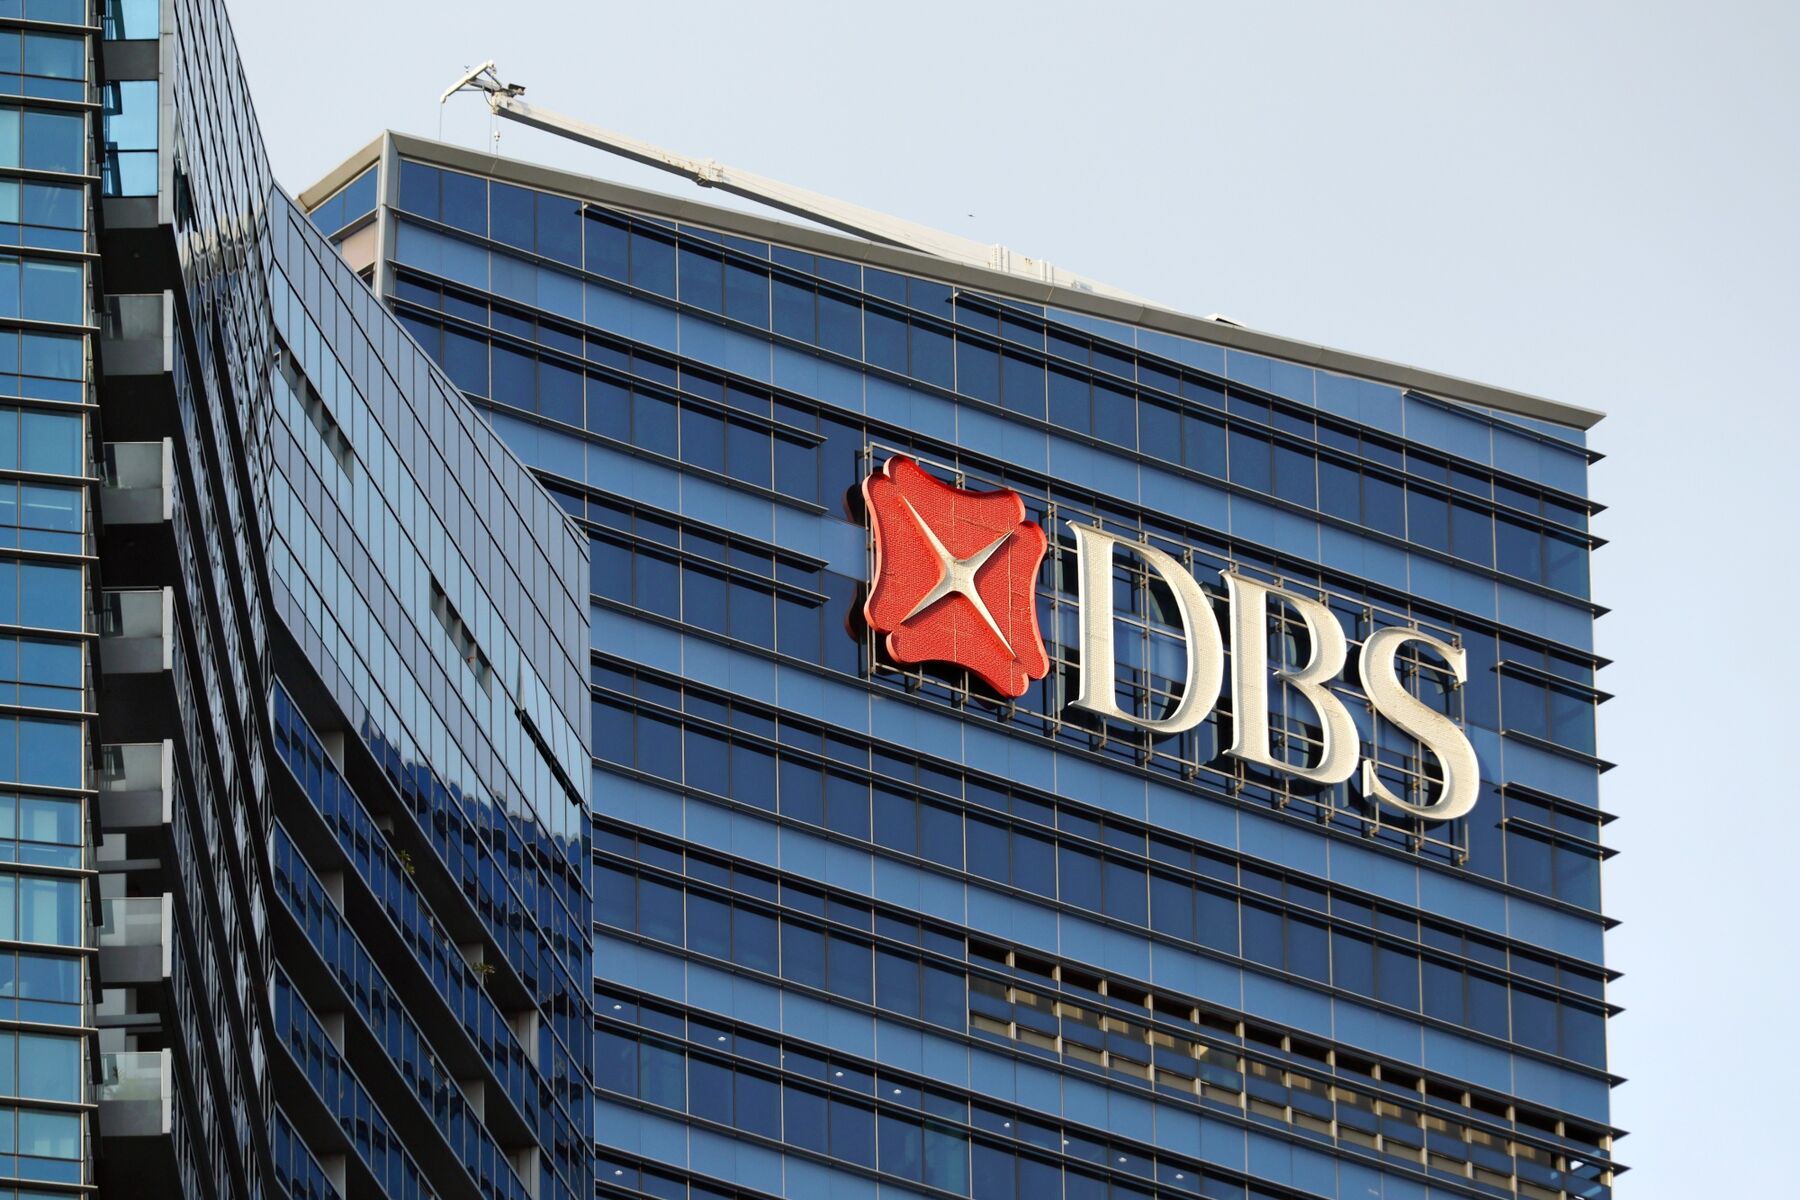 Singapore's top bank DBS eyes $370 billion in wealth assets by 2026